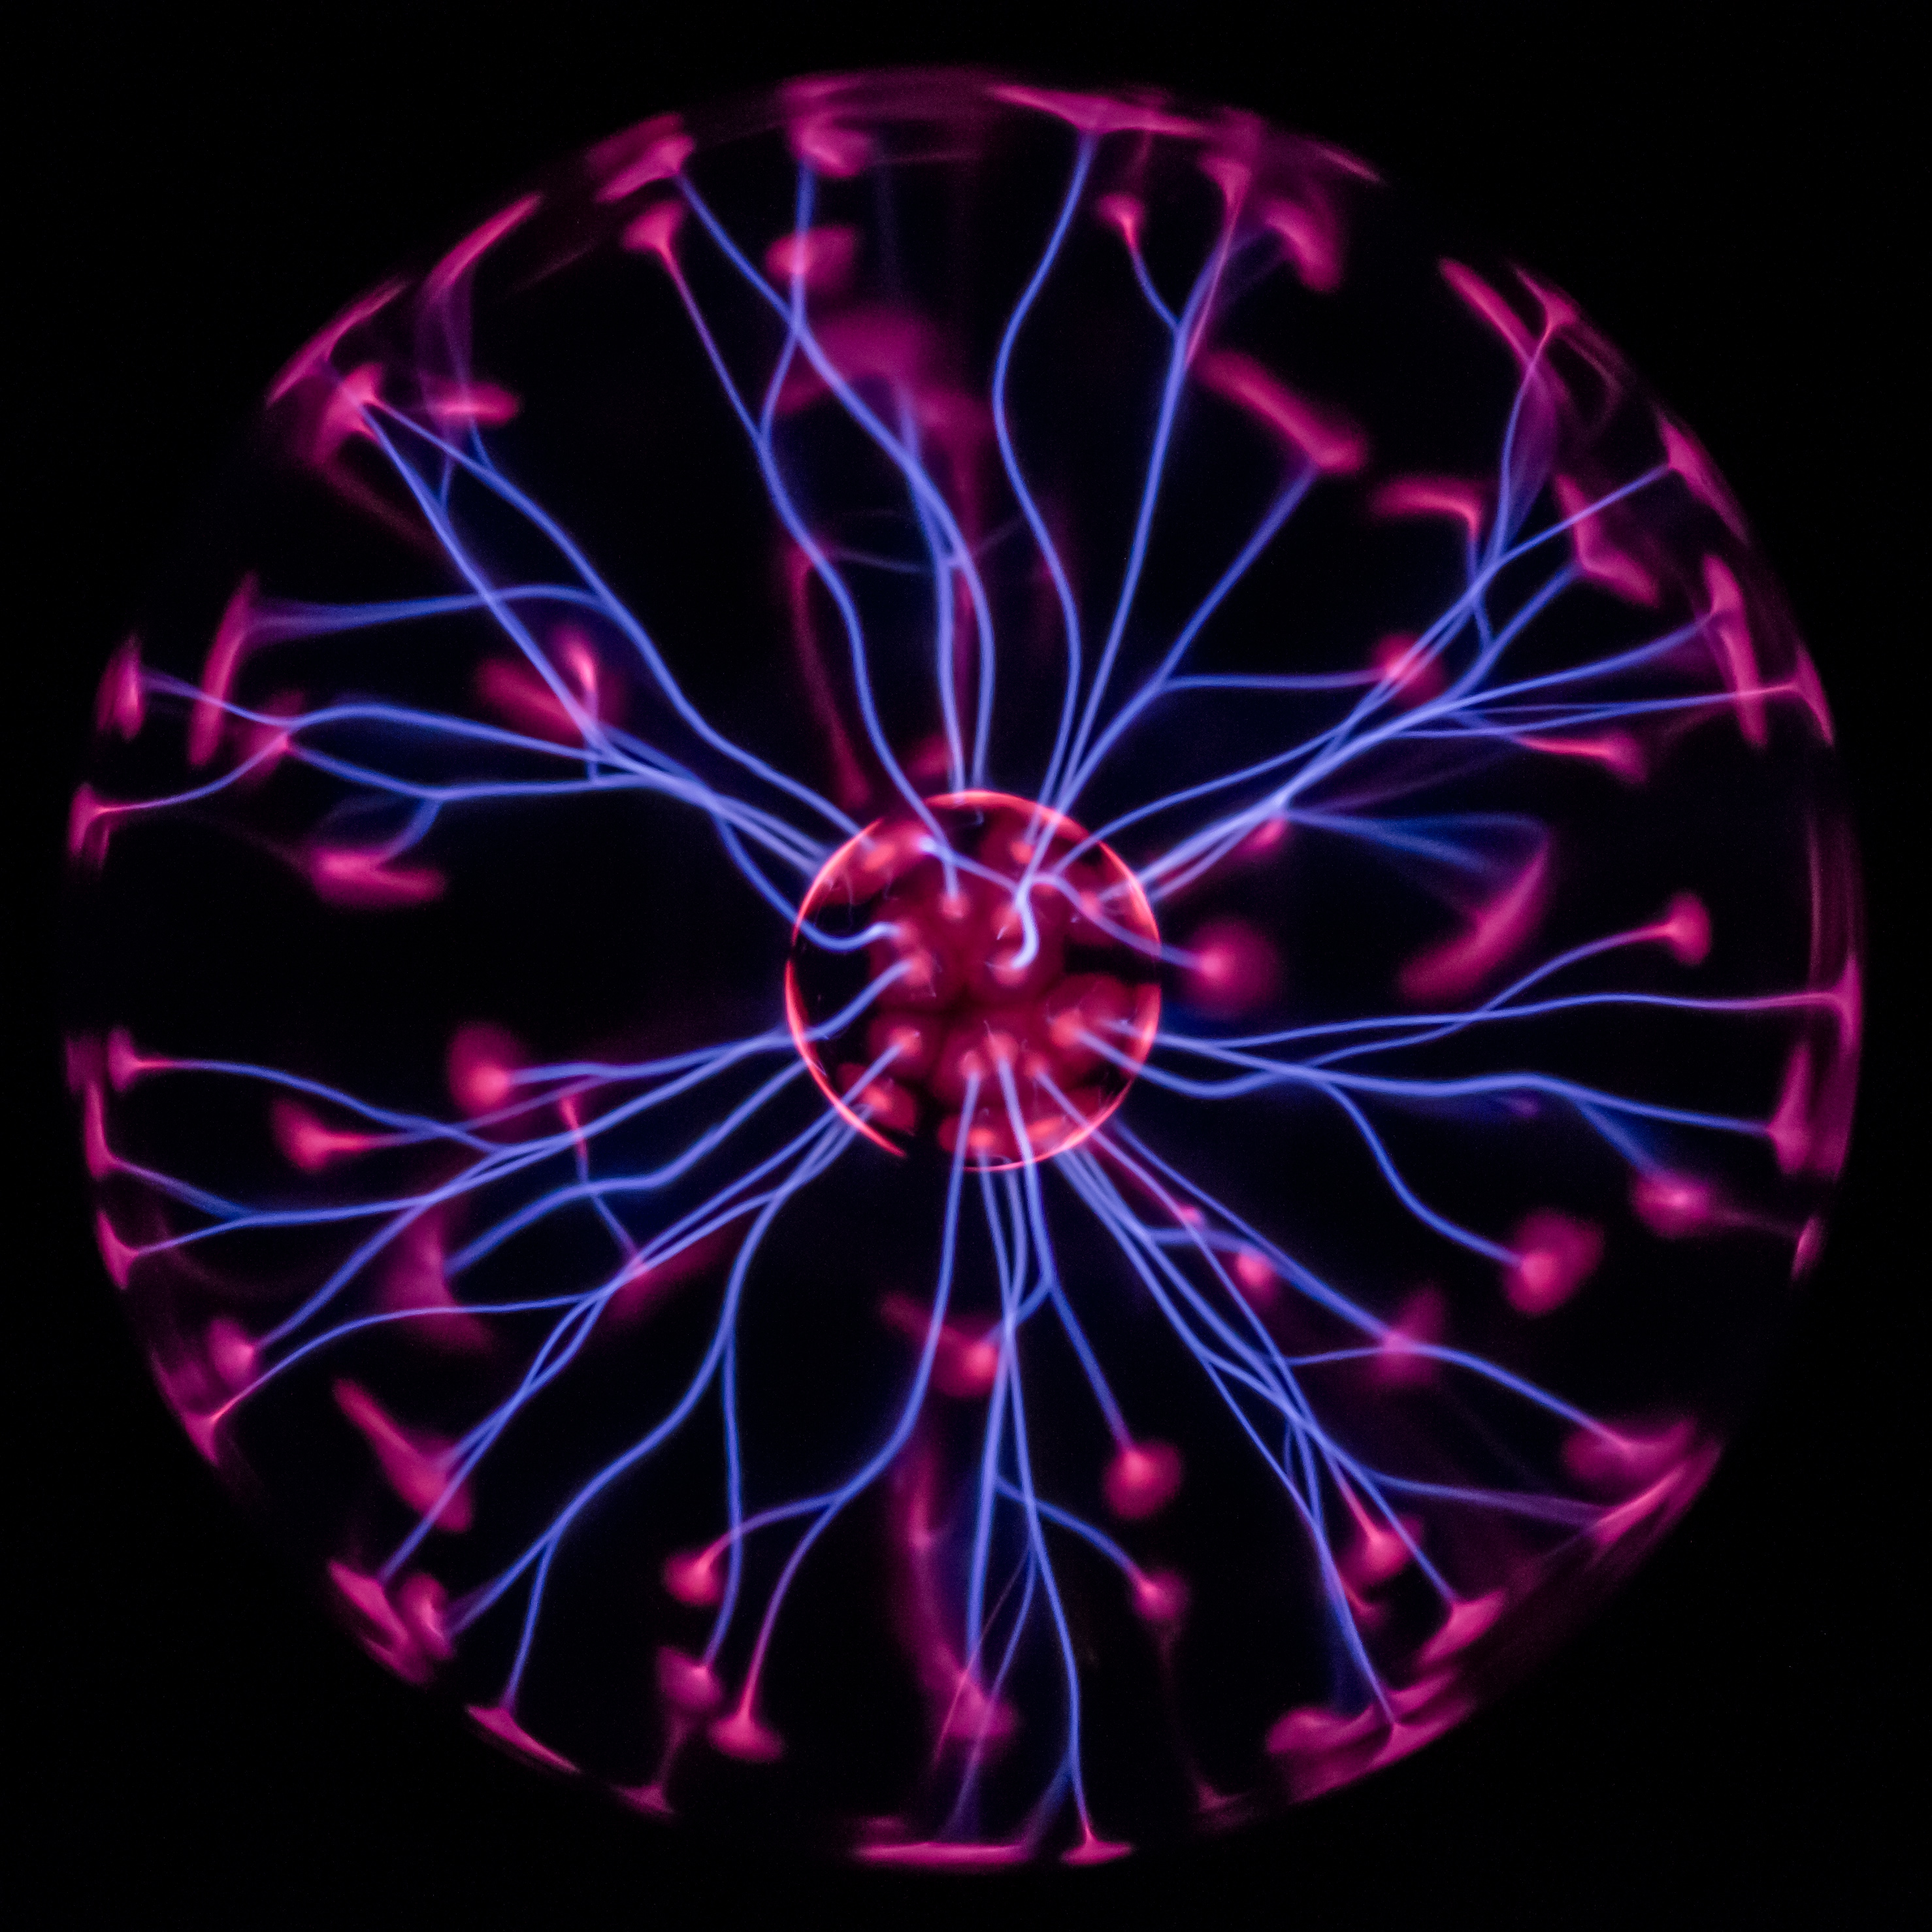 A plasma globe produces a plasma, fluid of charged particles. https:/commons.wikimedia.org/wiki/File:Plasma_globe_60th.jpg; 